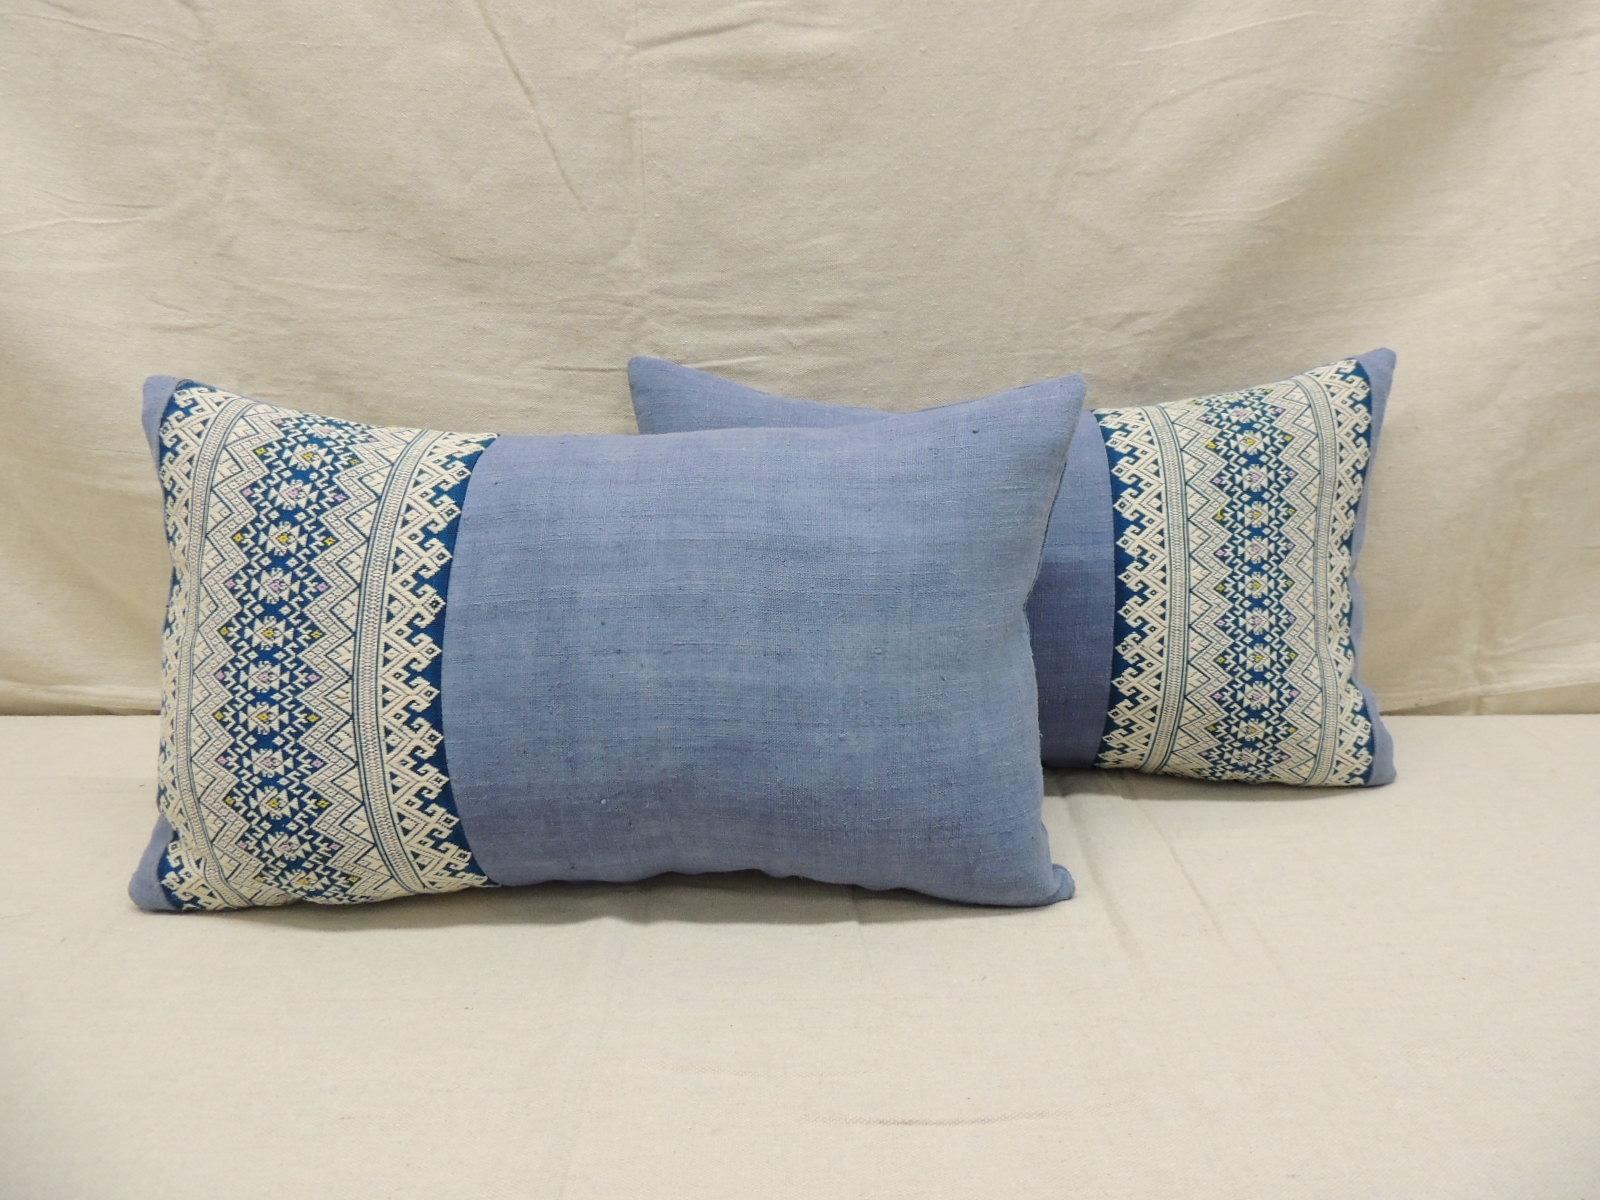 Hand-Crafted Pair of Vintage Blue and White Asian Decorative Lumbar Pillows